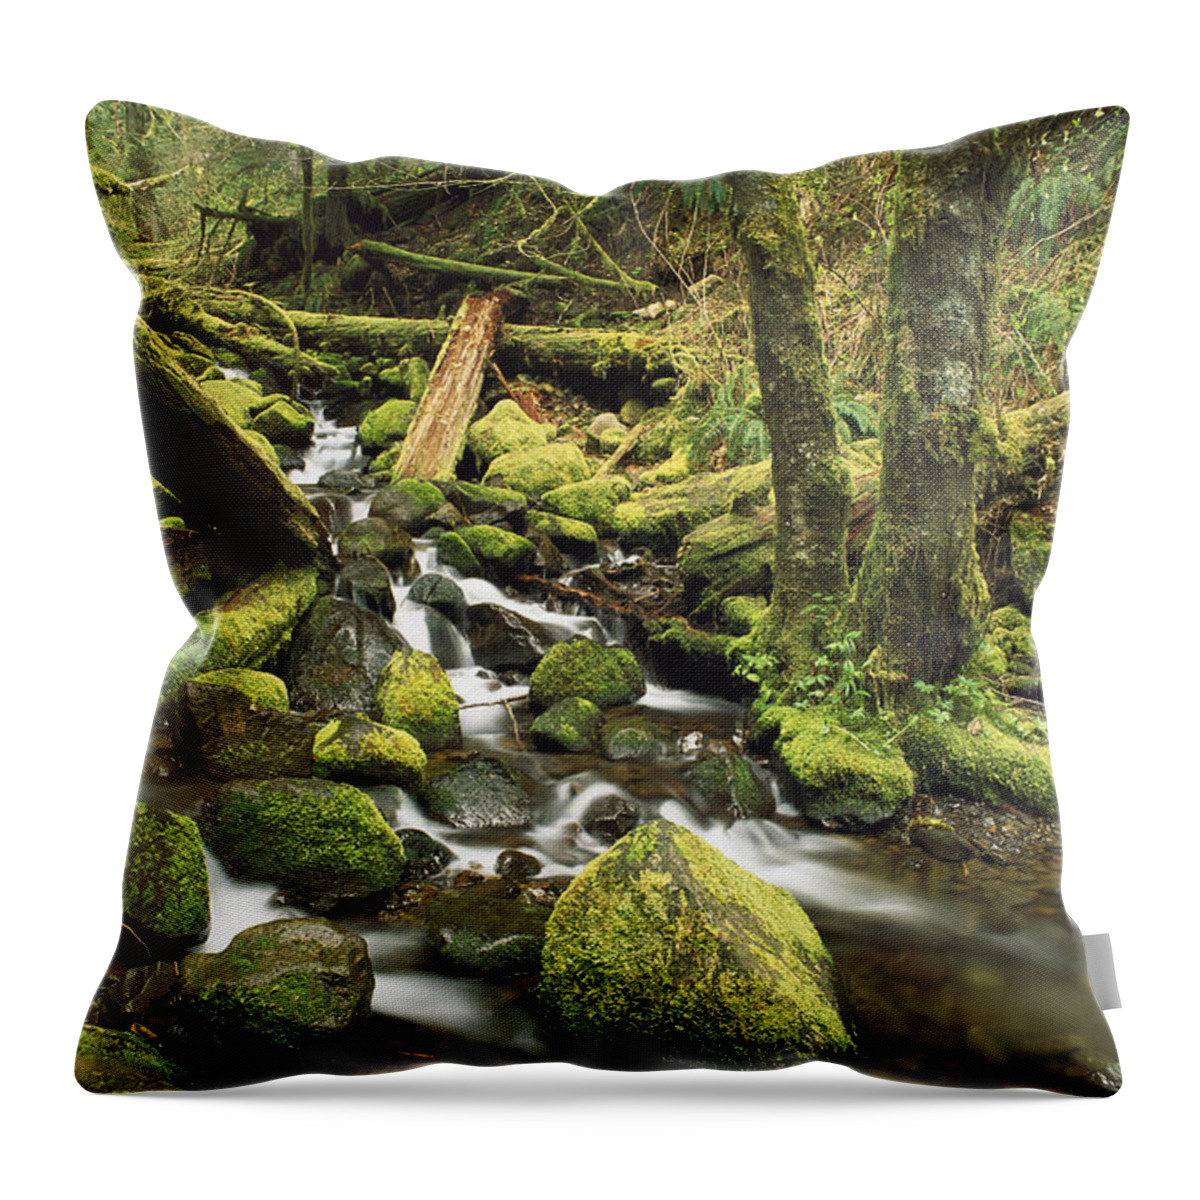 Mp Throw Pillow featuring the photograph Downed Logs In Sorensen Creek by Gerry Ellis